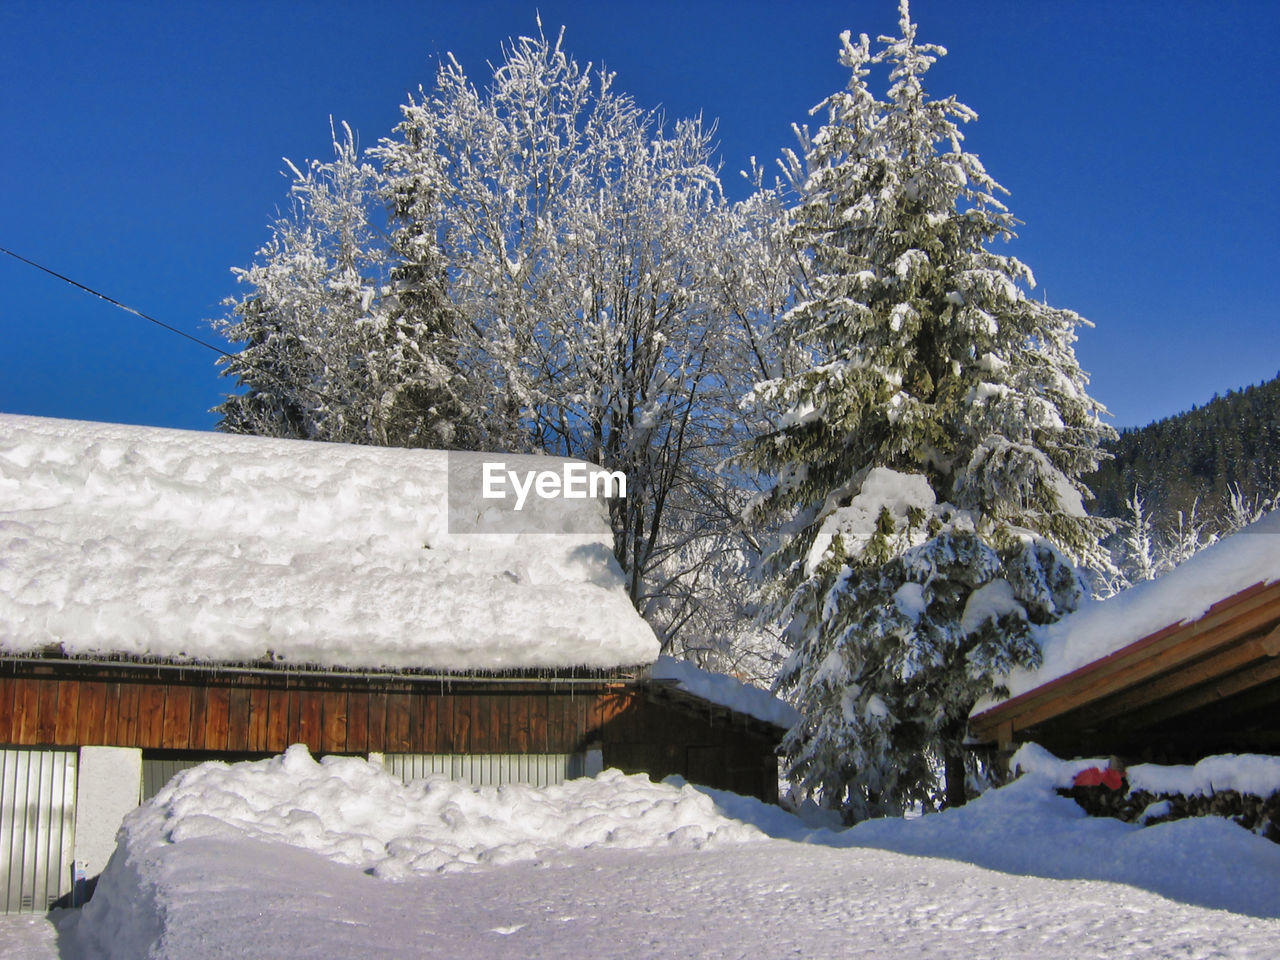 SNOW COVERED TREES AND HOUSES AGAINST SKY